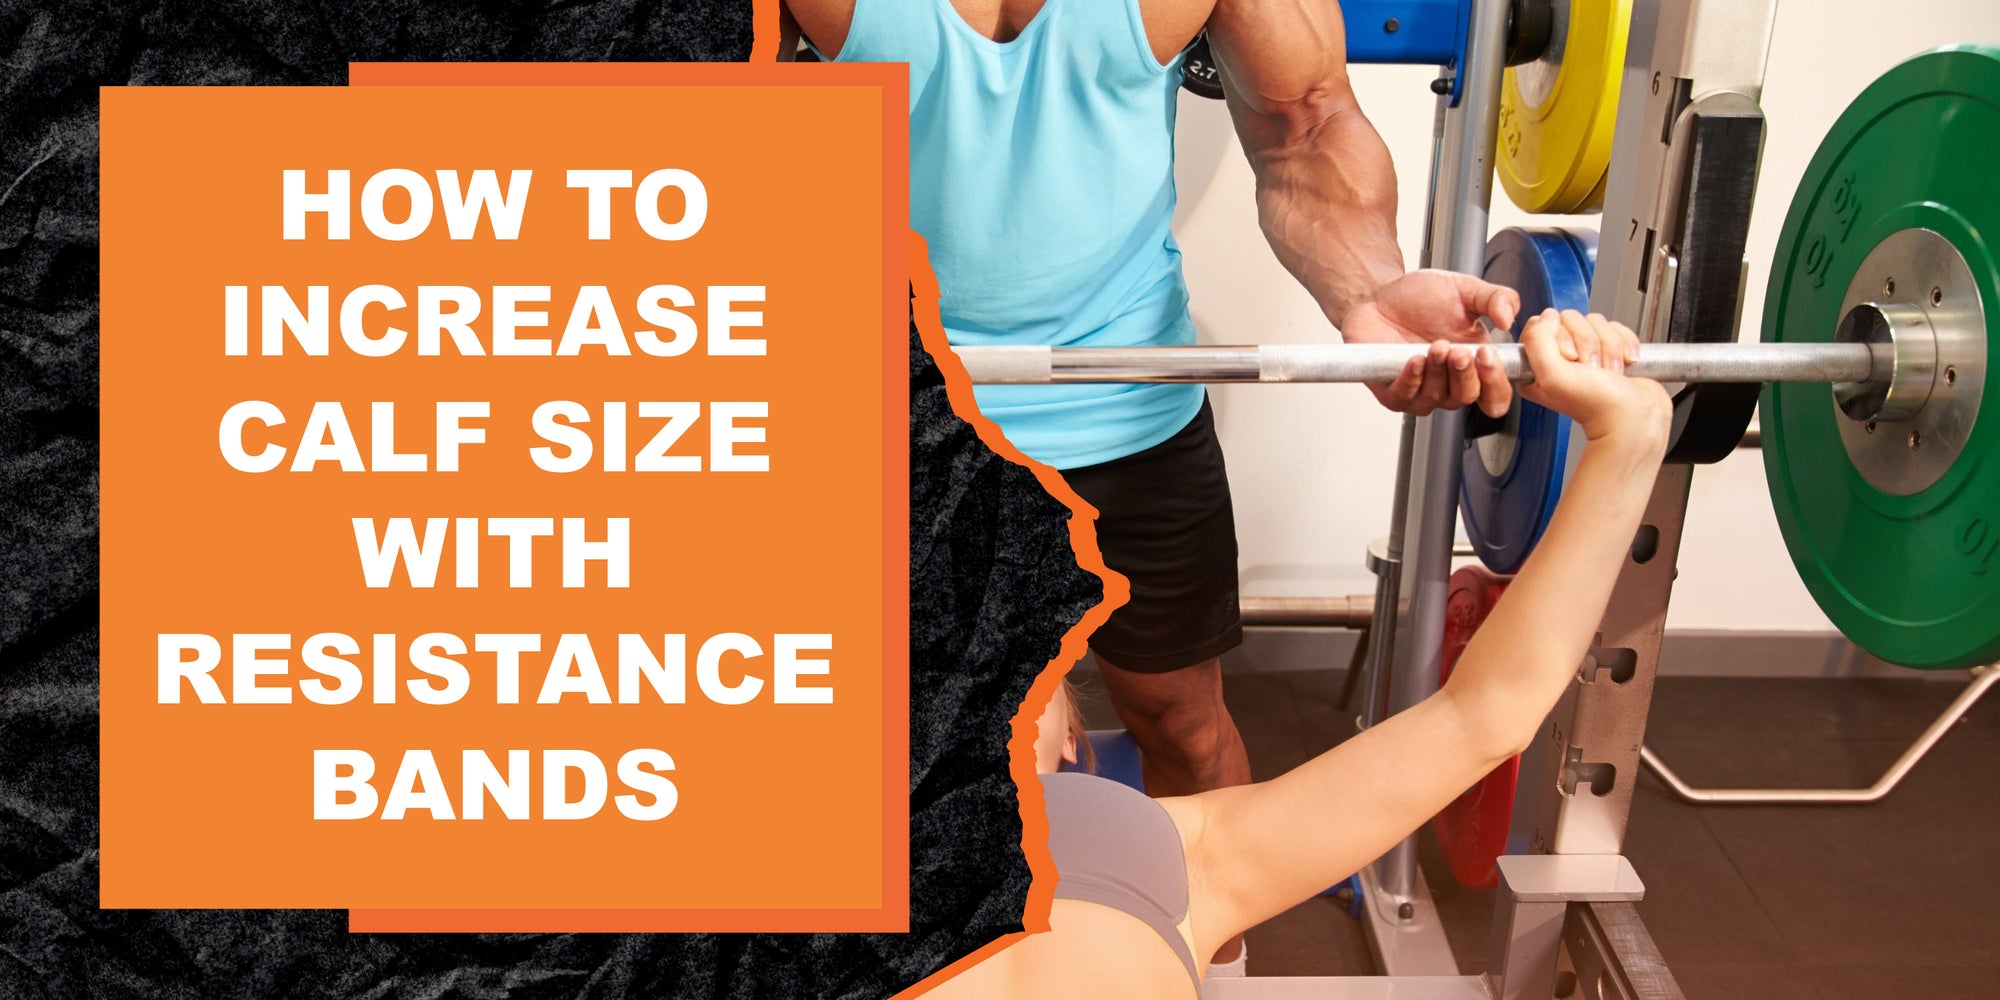 How to Increase Calf Size with Resistance Bands